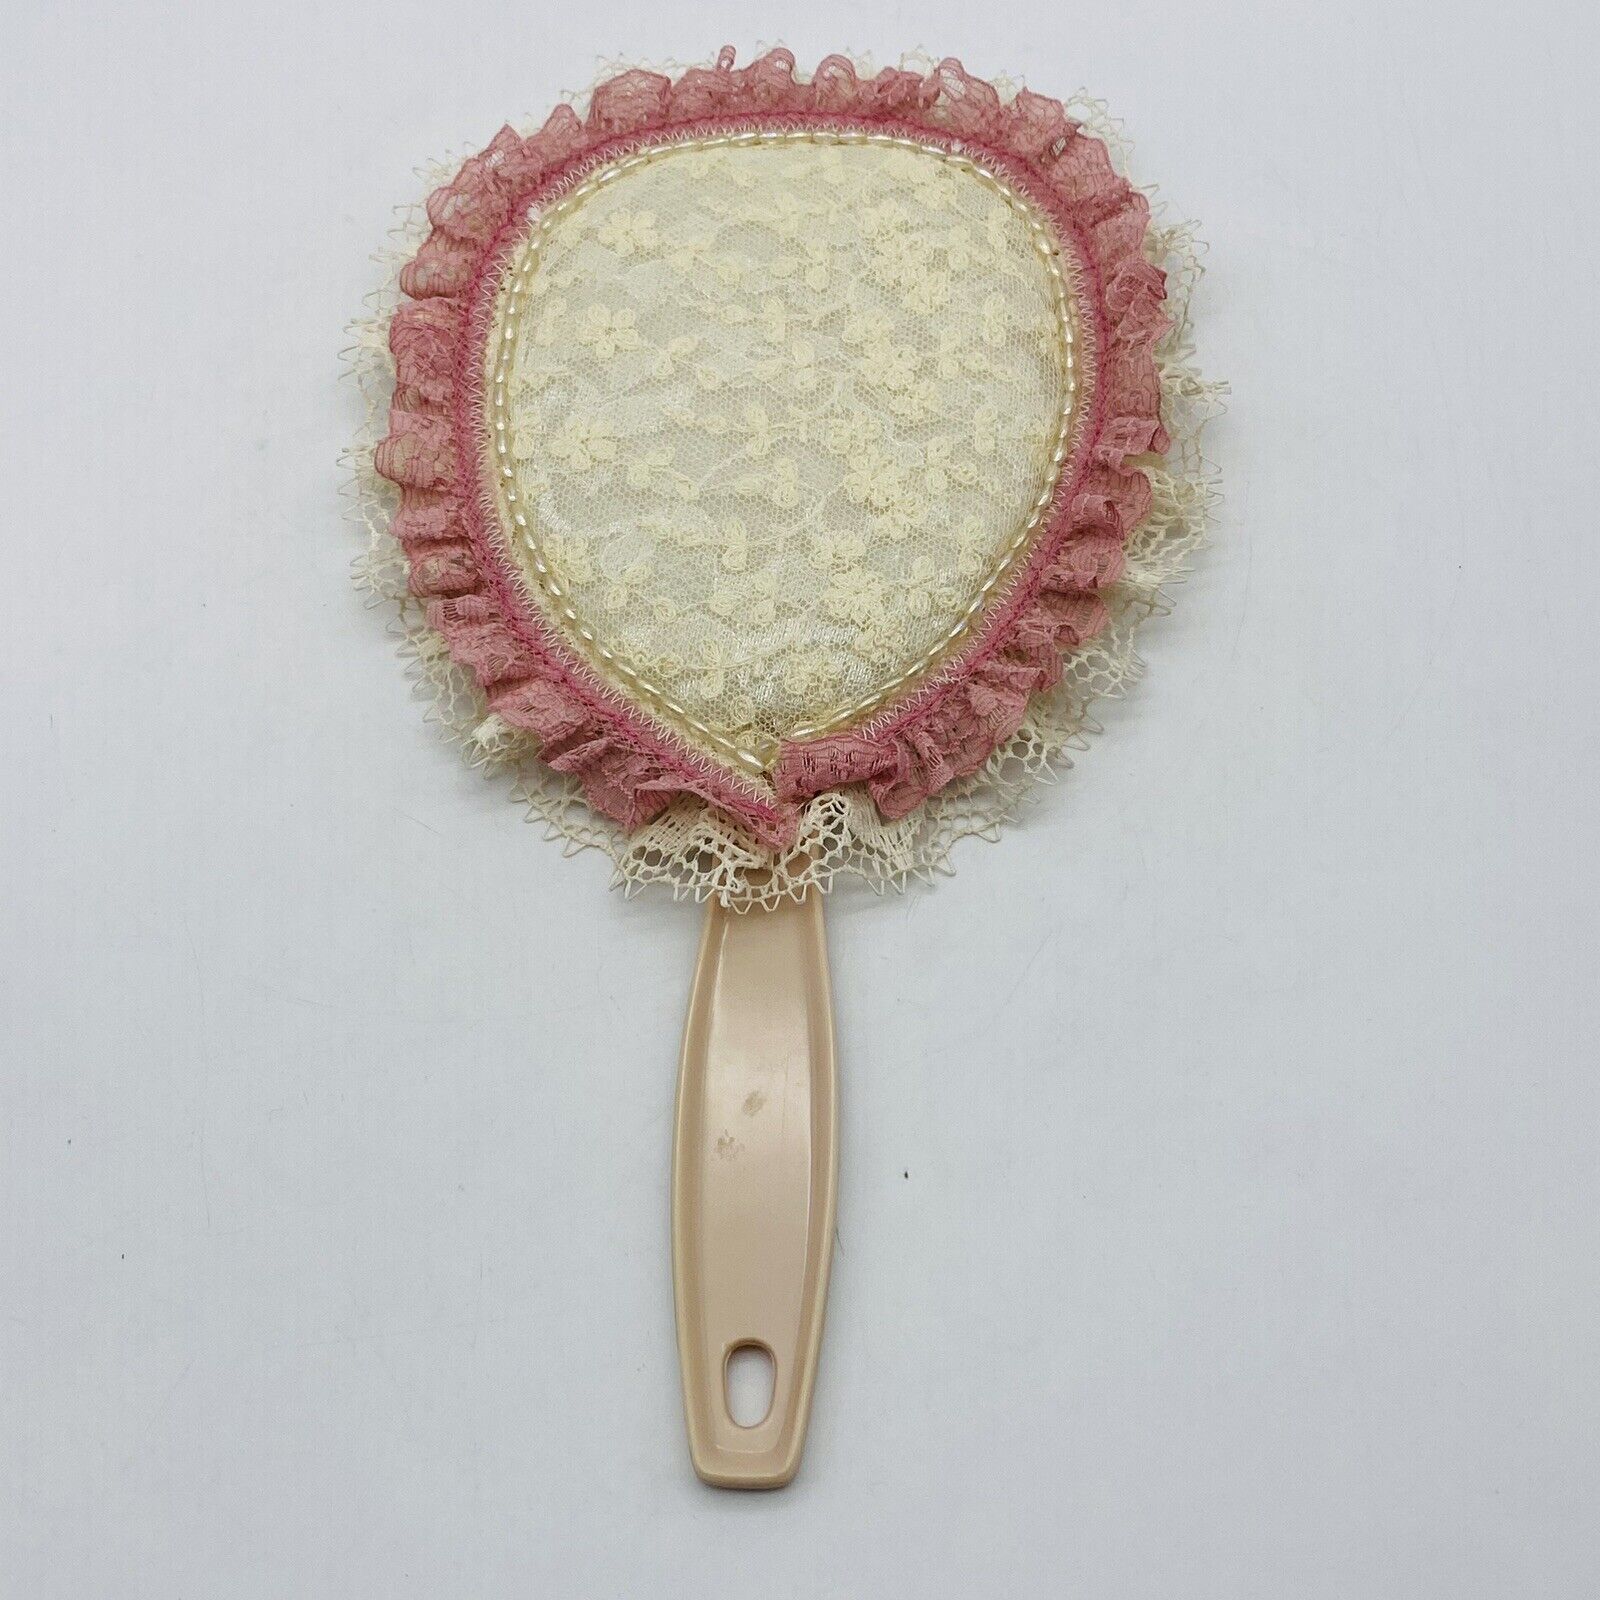 Vintage Shabby Chic Embellished Hand Mirror